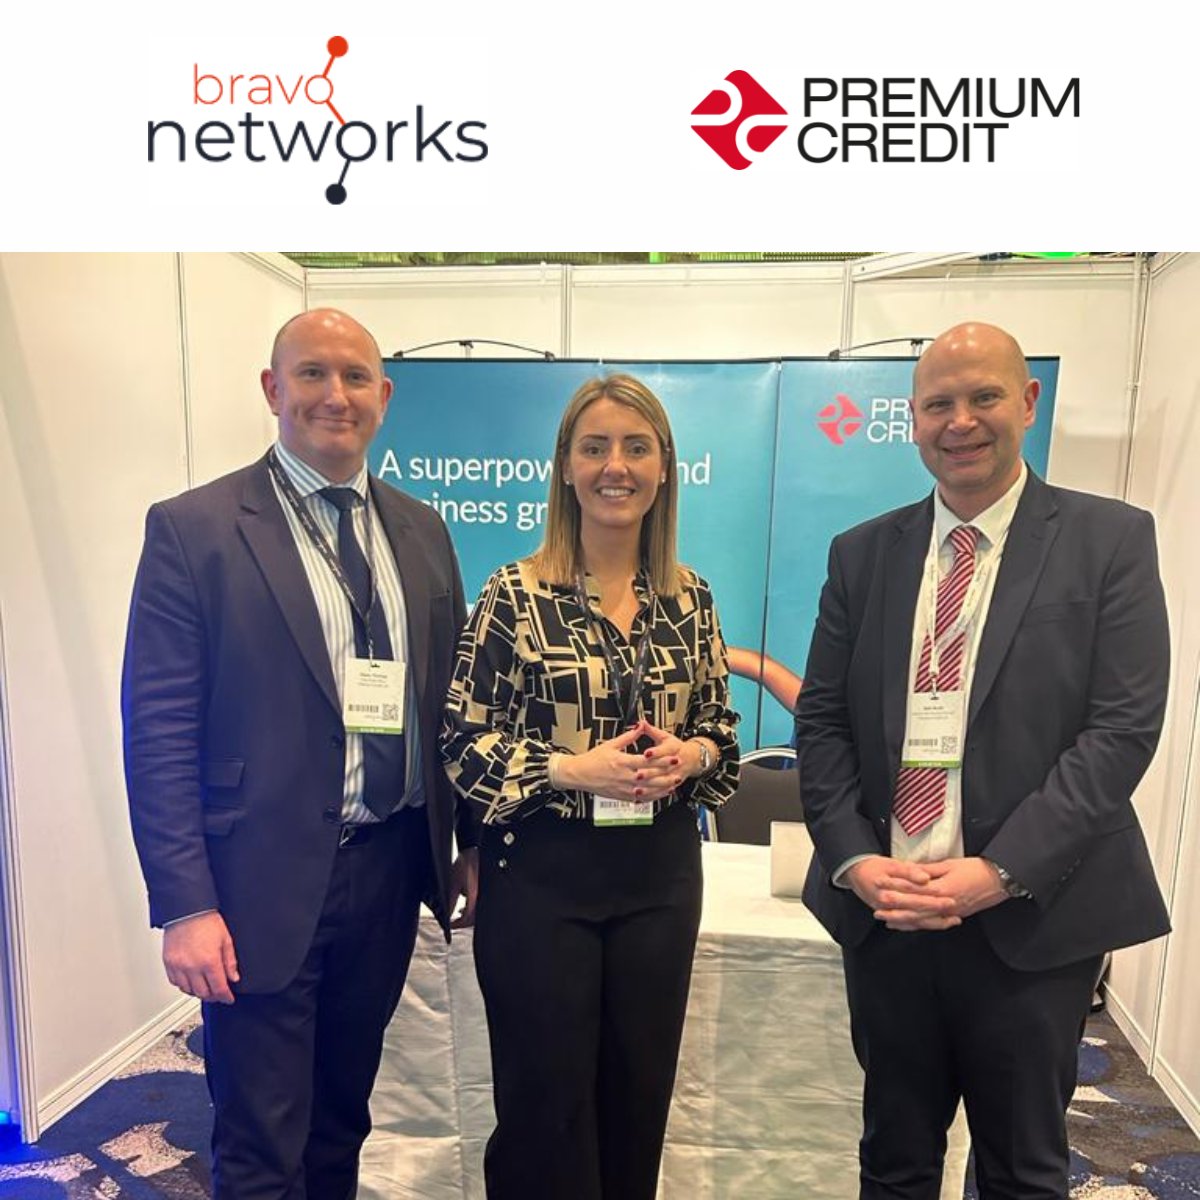 We're delighted to be at the @BravoNetworks Annual Conference & to share how we can support brokers and create growth opportunities through convenient payments. Come chat to our team. #bravoconference23 #premiumcredit #premiumfinance #growprotectsupport #bravoaccelerator #growth